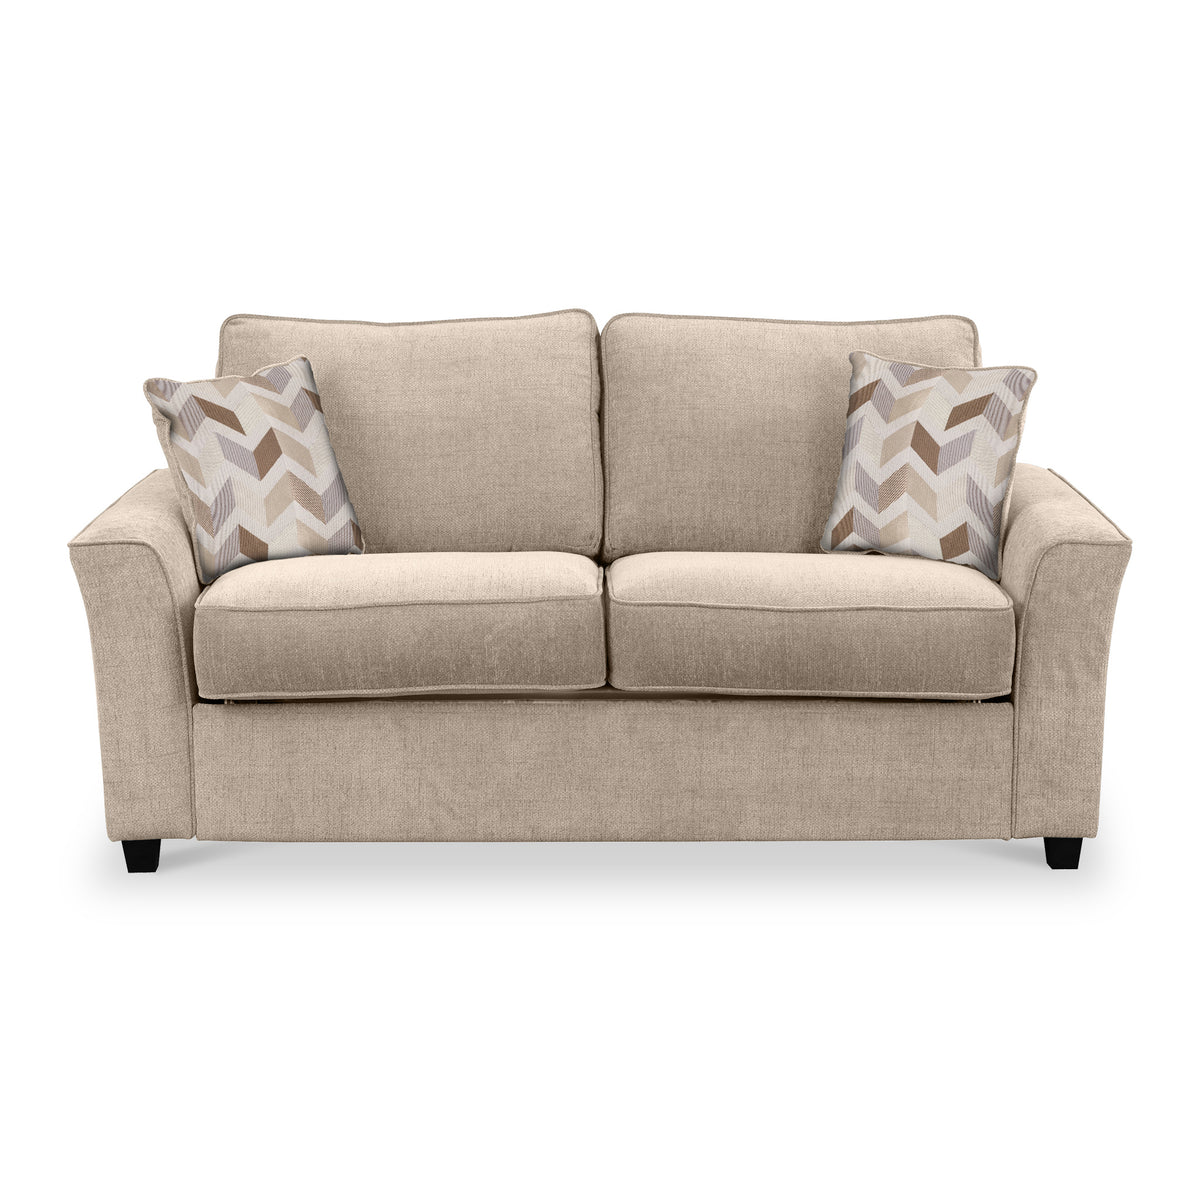 Abbott 2 Seater Sofabed in Oatmeal with Morelisa Oatmeal Cushions by Roseland Furniture